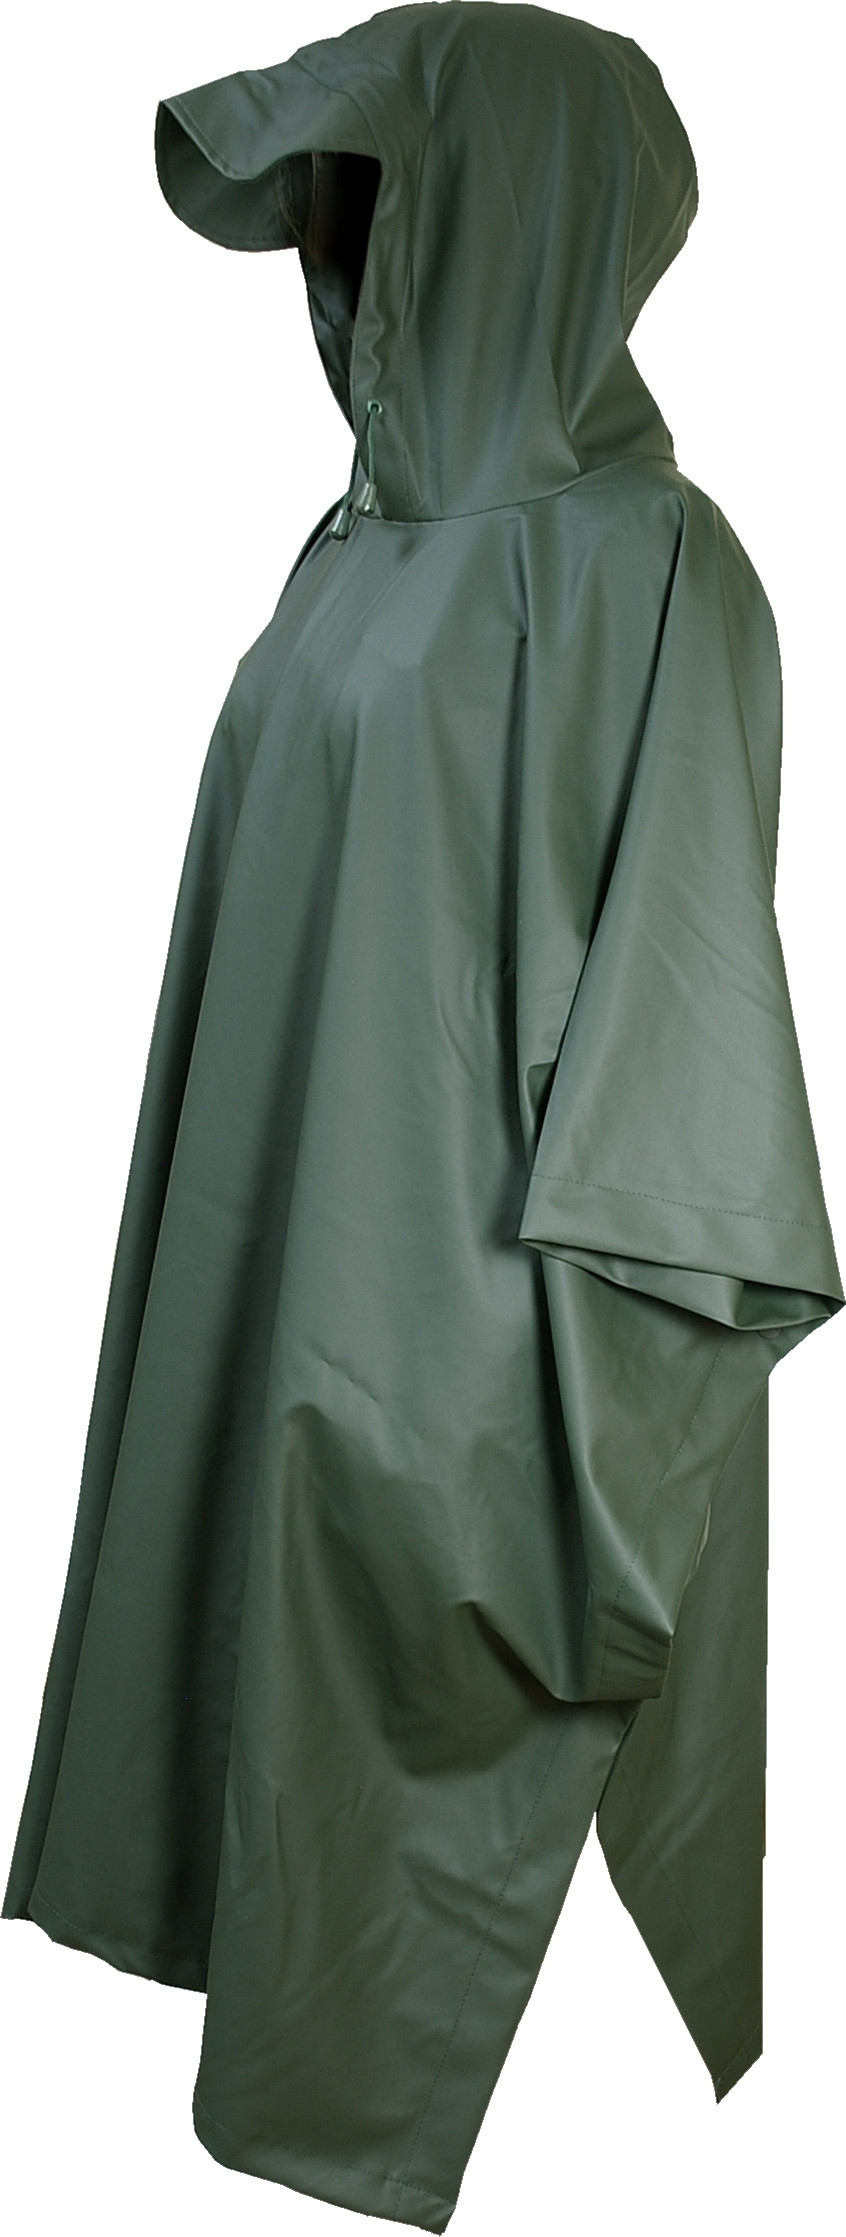 PONCHO IMPERMEABLE  VERDE 2710 ...